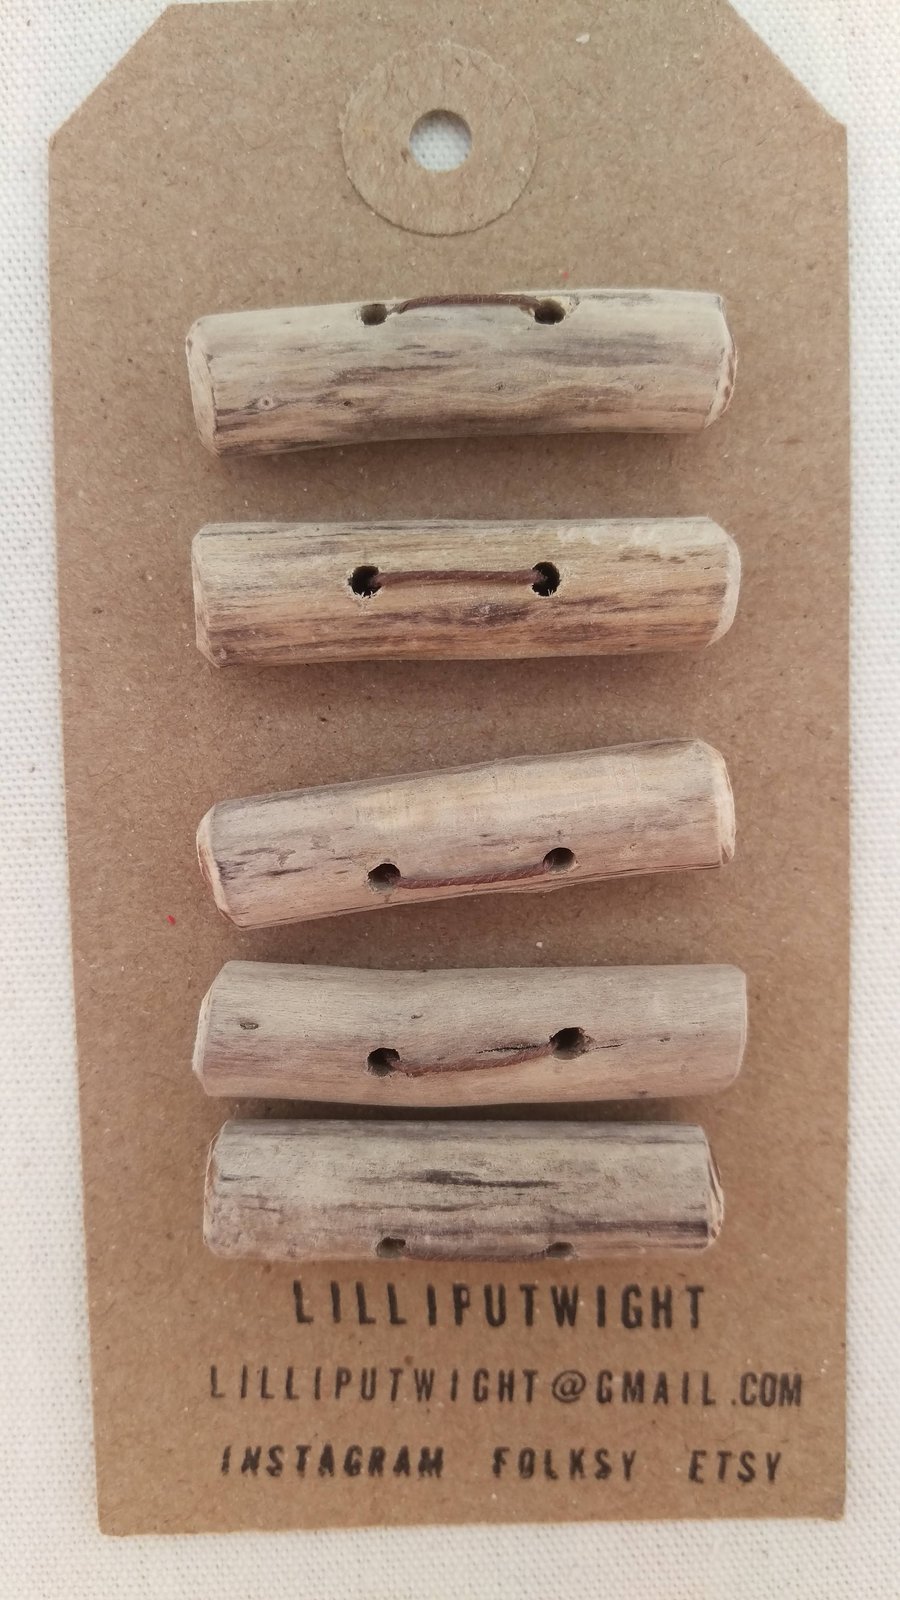 5 driftwood buttons, beachcombed toggle buttons